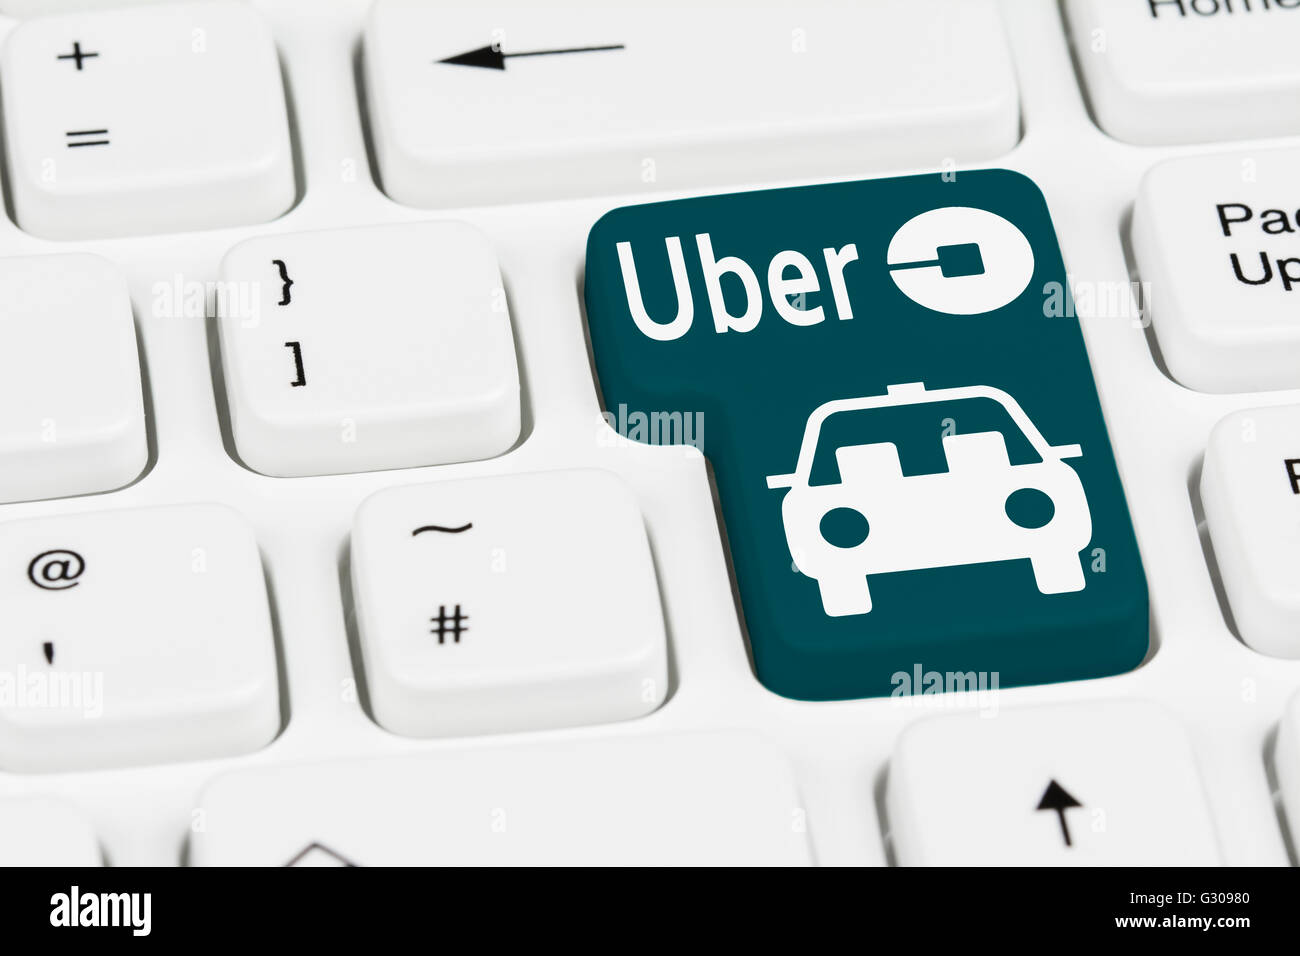 Uber taxi button on a computer keyboard. Stock Photo